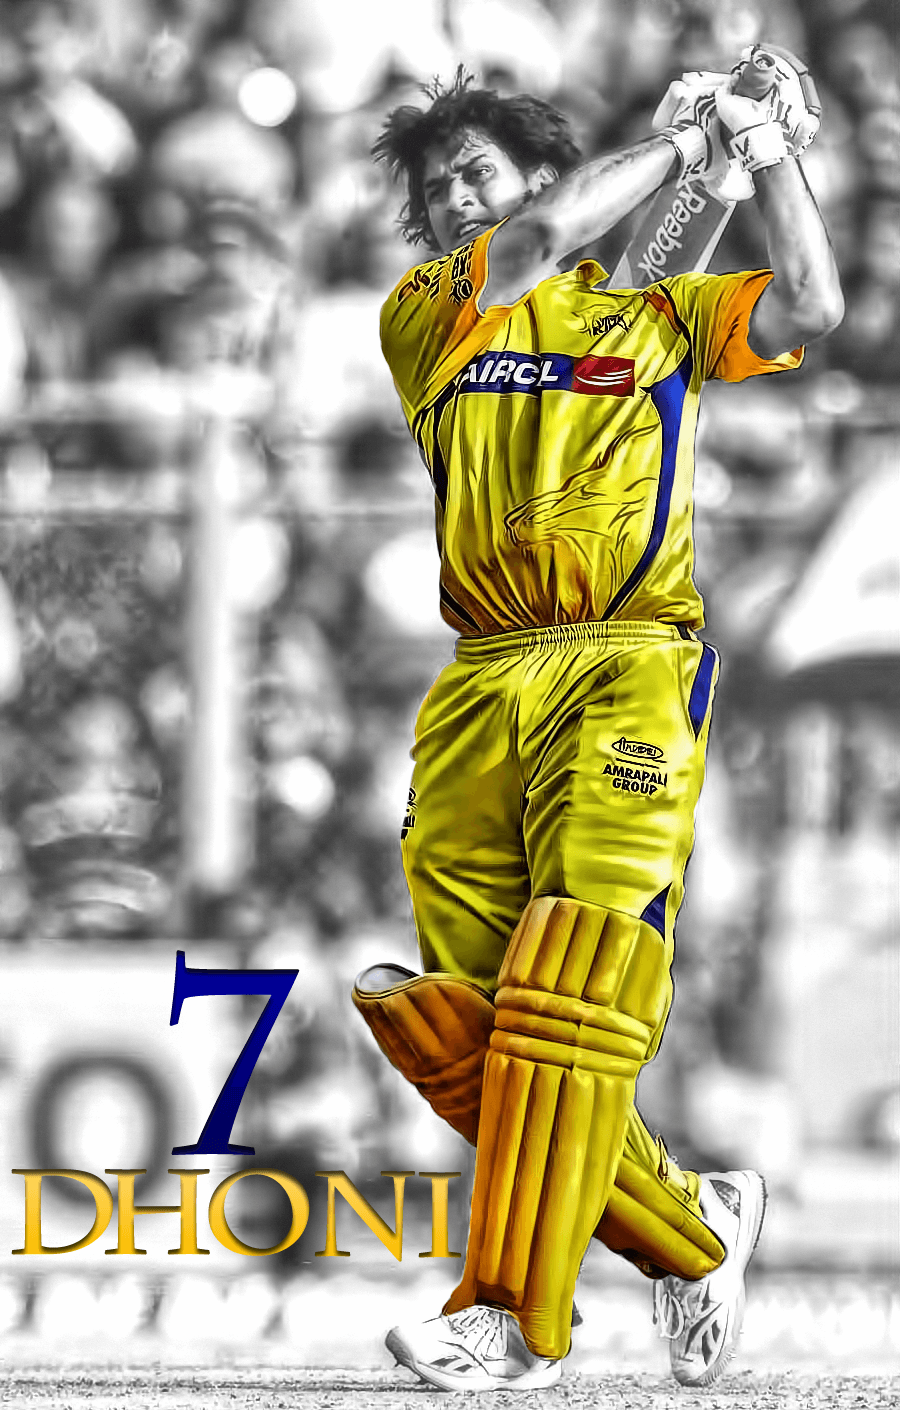 csk dhoni wallpapers